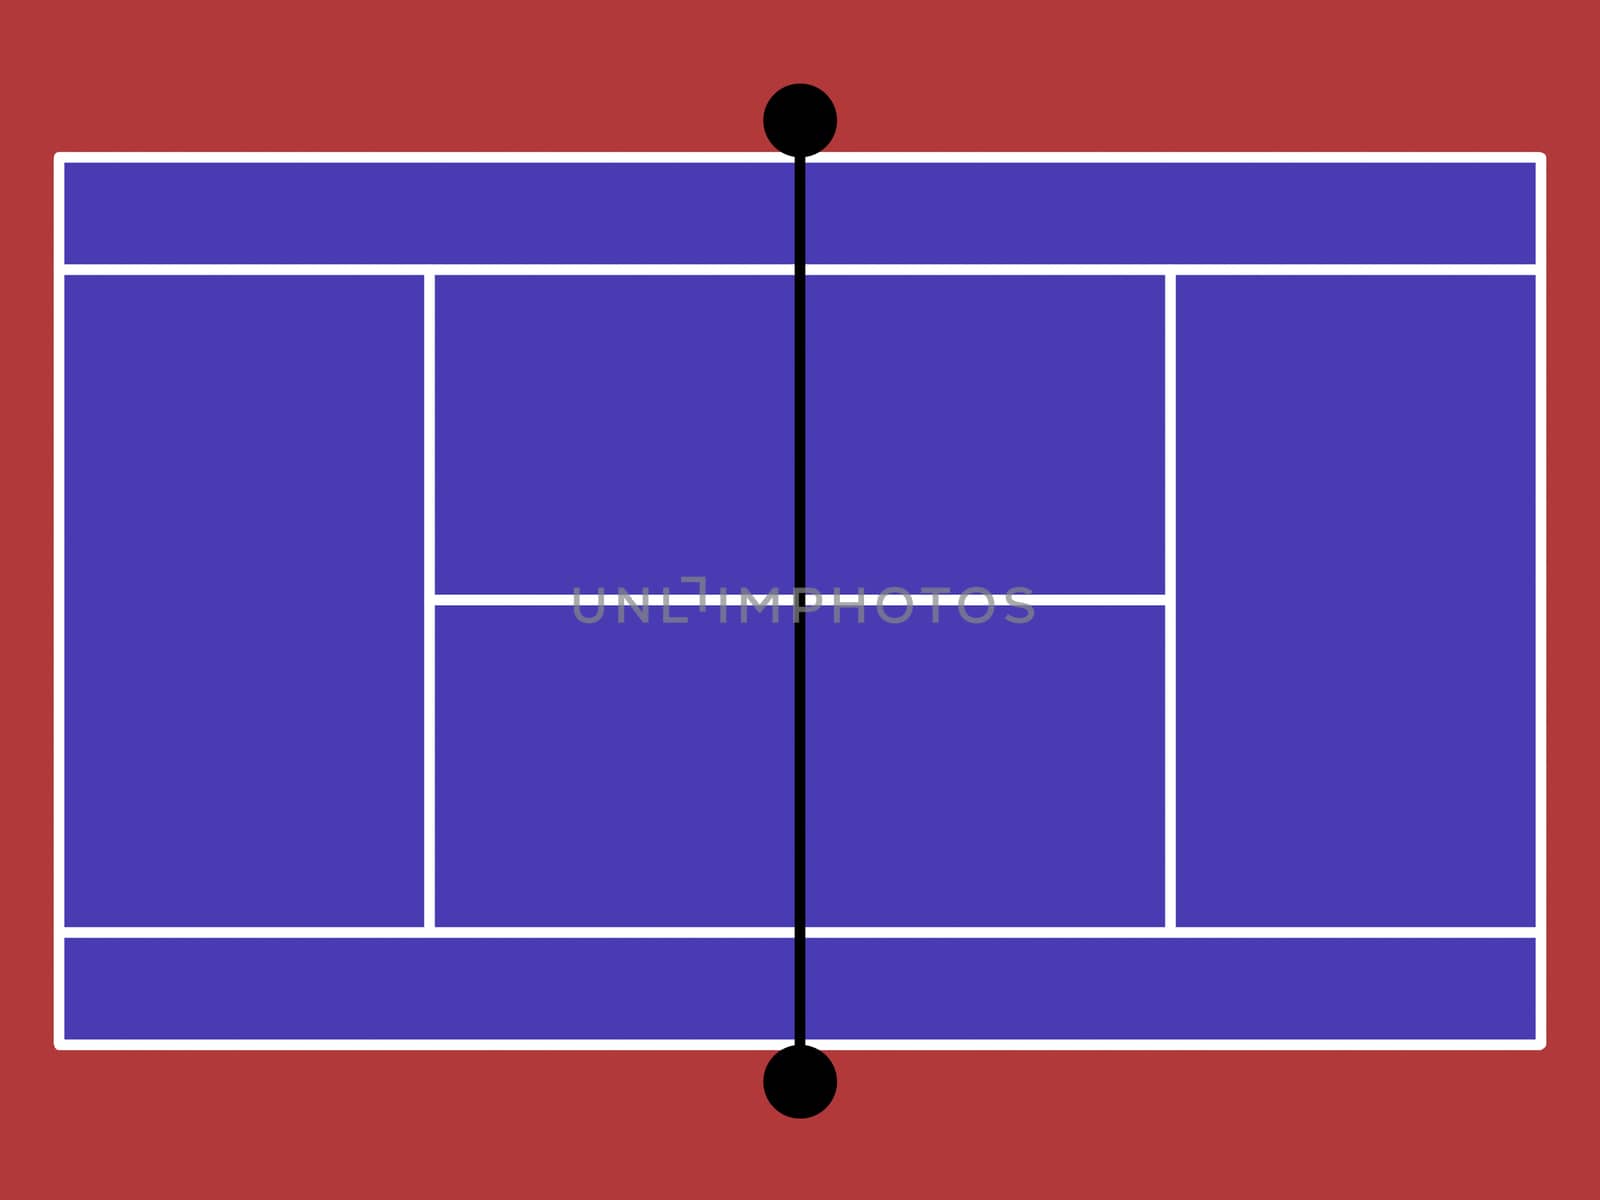 image model of the tennis court